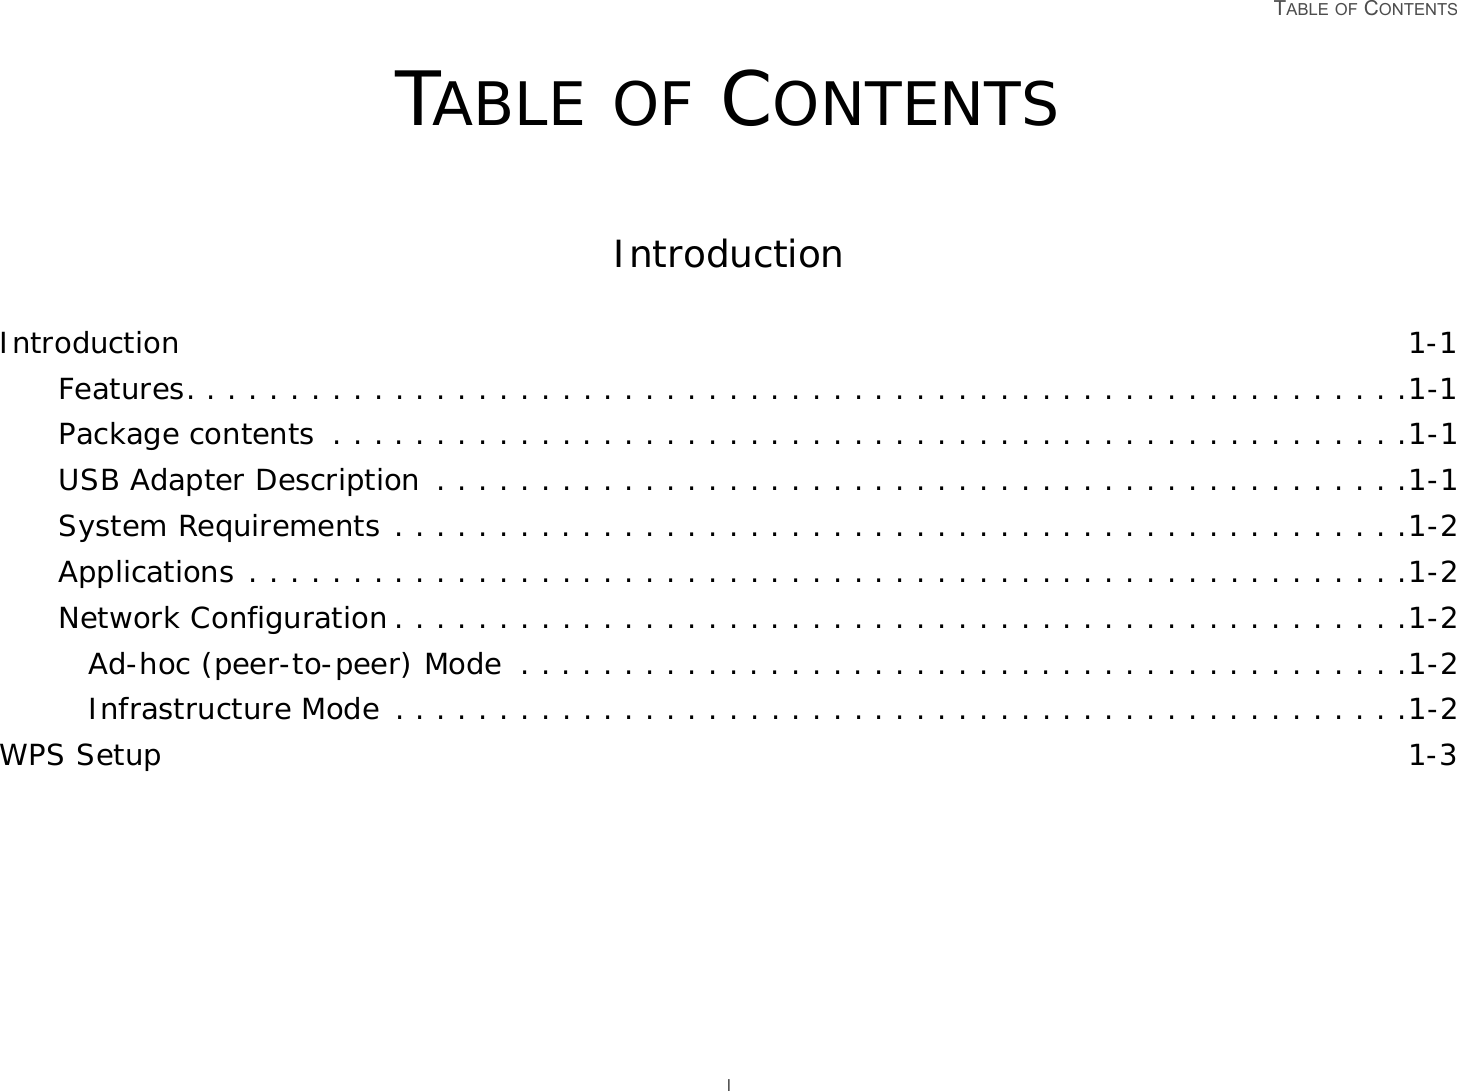 TABLE OF CONTENTS ITABLE OF CONTENTSIntroductionIntroduction 1-1Features. . . . . . . . . . . . . . . . . . . . . . . . . . . . . . . . . . . . . . . . . . . . . . . . . . . . . . . . . . .1-1Package contents  . . . . . . . . . . . . . . . . . . . . . . . . . . . . . . . . . . . . . . . . . . . . . . . . . . . .1-1USB Adapter Description . . . . . . . . . . . . . . . . . . . . . . . . . . . . . . . . . . . . . . . . . . . . . . .1-1System Requirements . . . . . . . . . . . . . . . . . . . . . . . . . . . . . . . . . . . . . . . . . . . . . . . . .1-2Applications . . . . . . . . . . . . . . . . . . . . . . . . . . . . . . . . . . . . . . . . . . . . . . . . . . . . . . . .1-2Network Configuration . . . . . . . . . . . . . . . . . . . . . . . . . . . . . . . . . . . . . . . . . . . . . . . . .1-2Ad-hoc (peer-to-peer) Mode  . . . . . . . . . . . . . . . . . . . . . . . . . . . . . . . . . . . . . . . . . . .1-2Infrastructure Mode . . . . . . . . . . . . . . . . . . . . . . . . . . . . . . . . . . . . . . . . . . . . . . . . .1-2WPS Setup 1-3